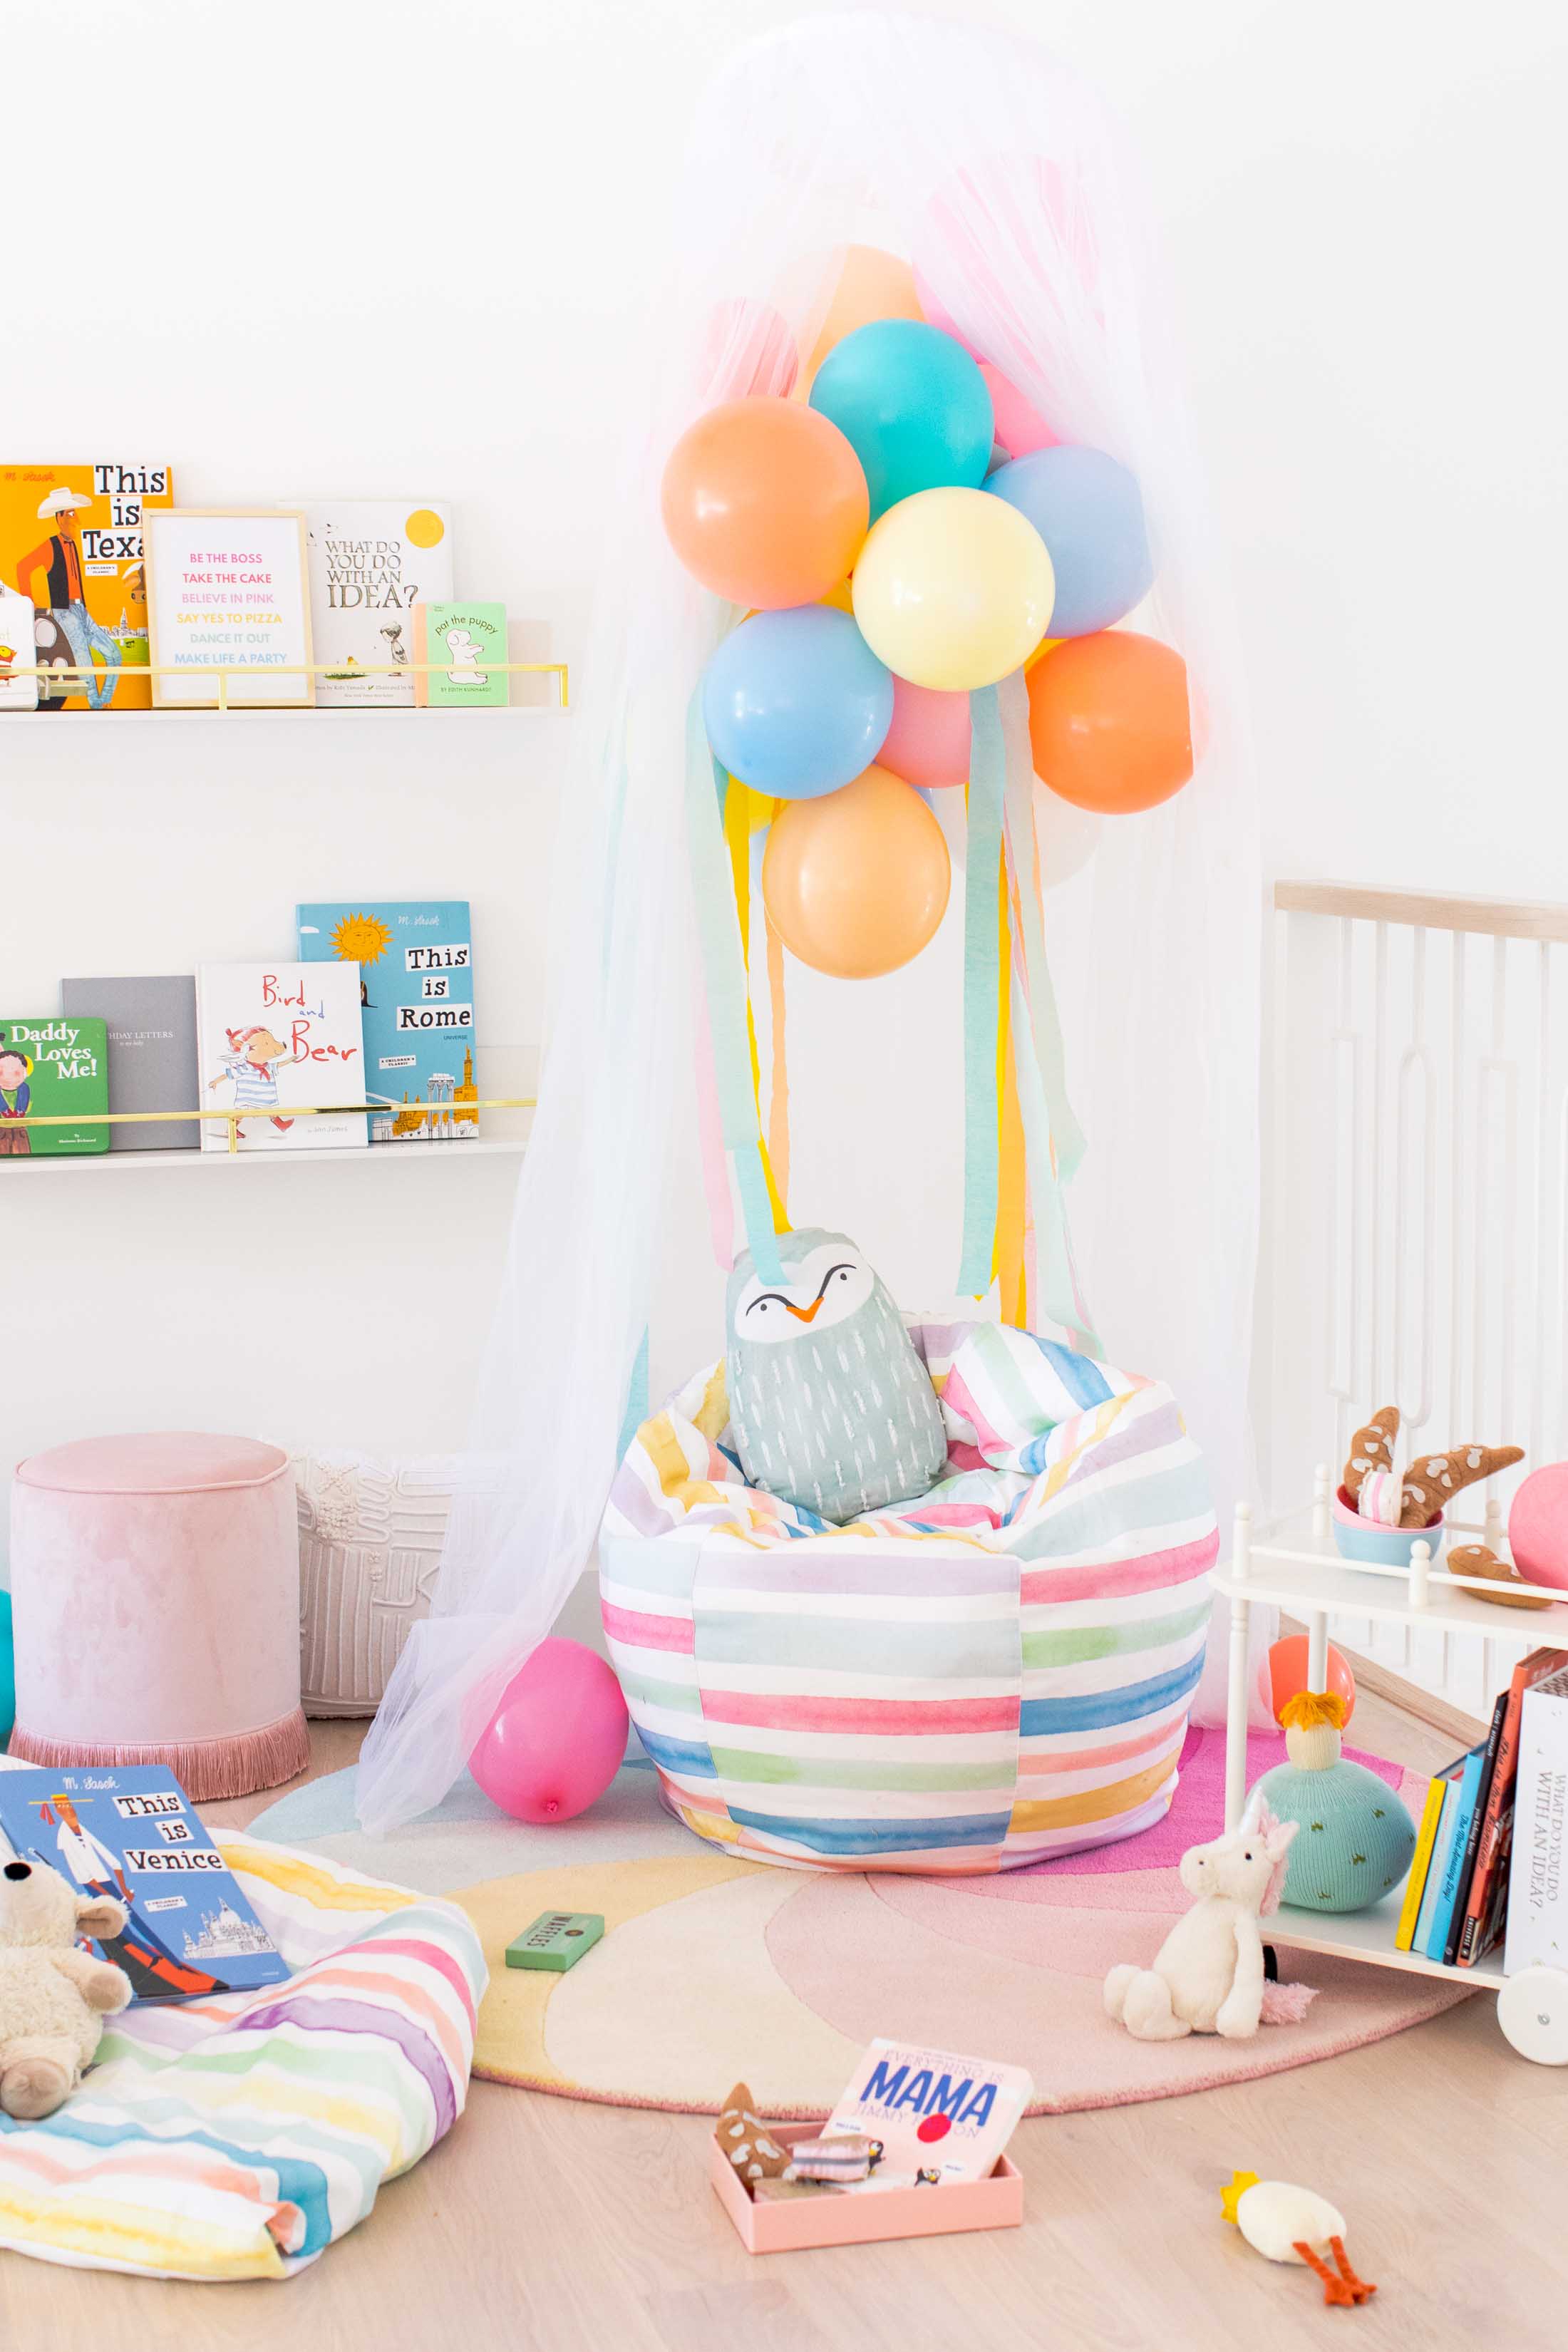 Sharing how to make this DIY book nook with a few colorful reading nook ideas to make it your own! #decor #kids #diy #reading by top Houston lifestyle blogger Ashley Rose of Sugar & Cloth